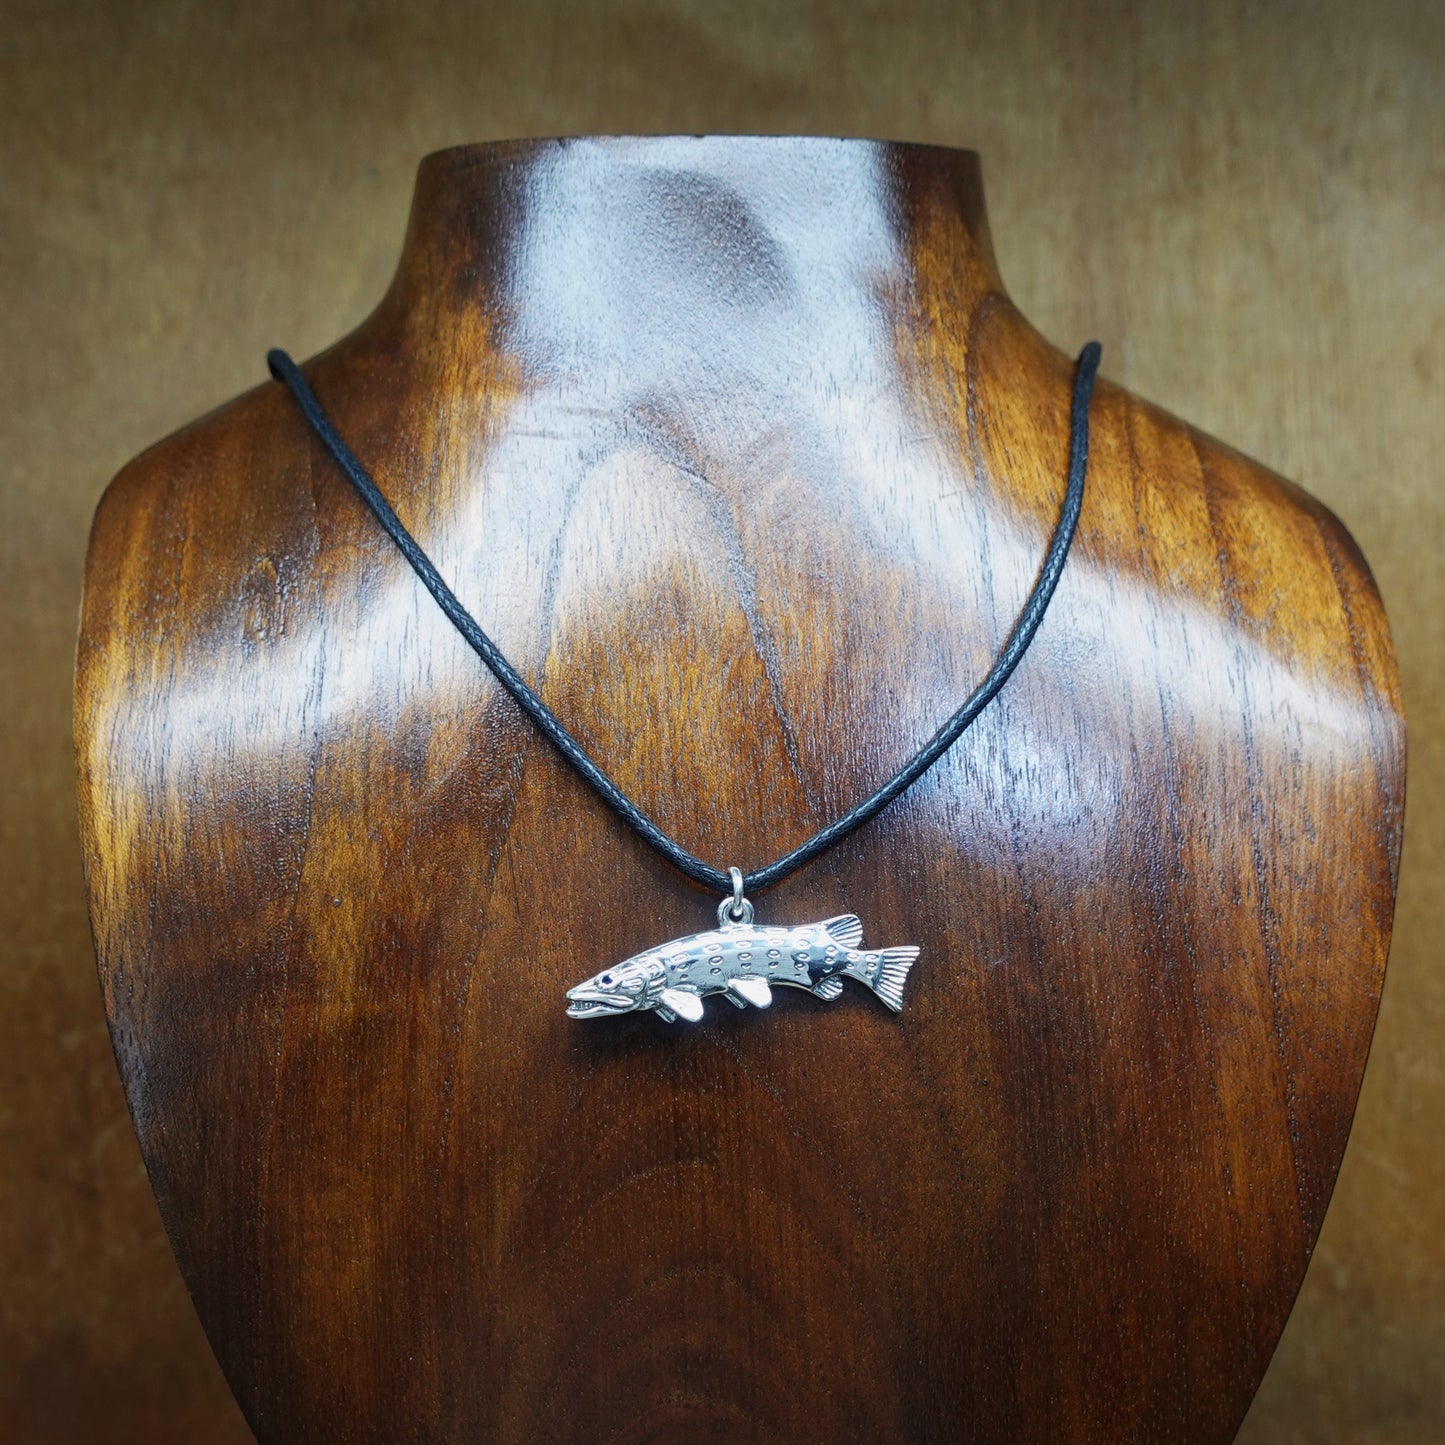 Pike fishing necklace. Made from sterling silver with an antiqued finish, set with a gemstone eye.. Ideal fisherman’s angling gift © Adrian Ashley